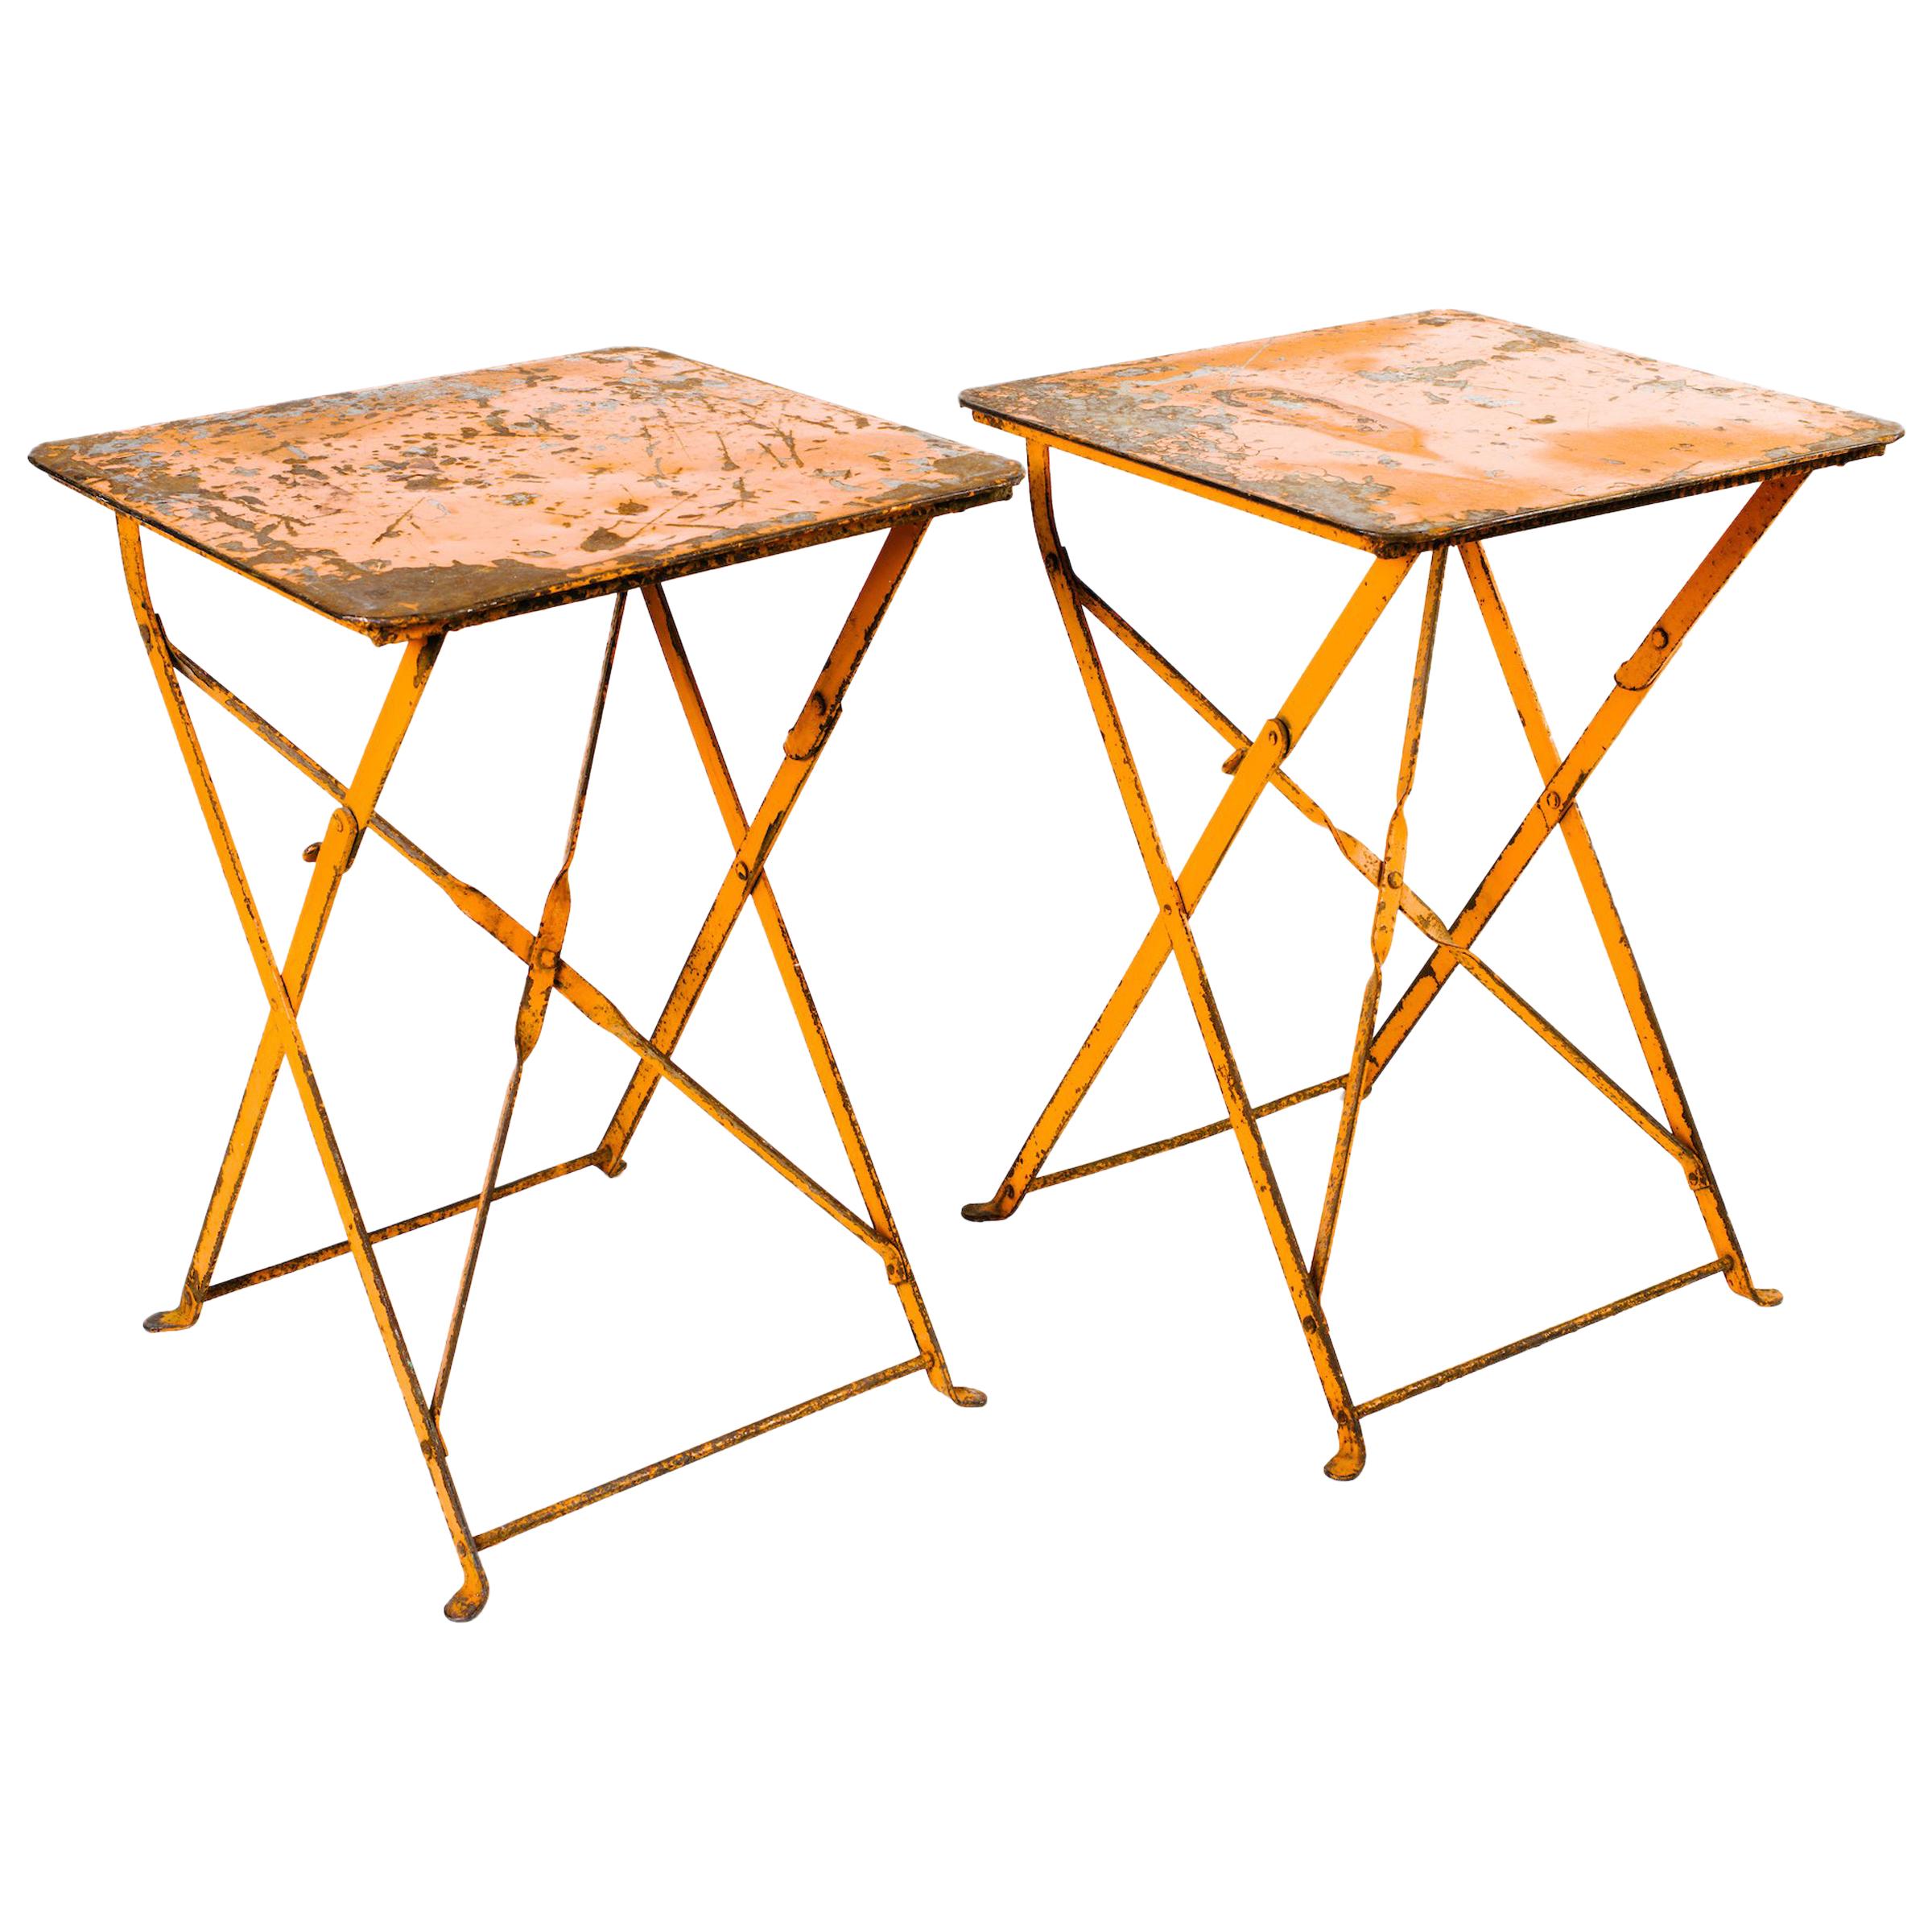 Pair of French Antique Iron Folding Garden Tables in Distressed Orange, c 1930's